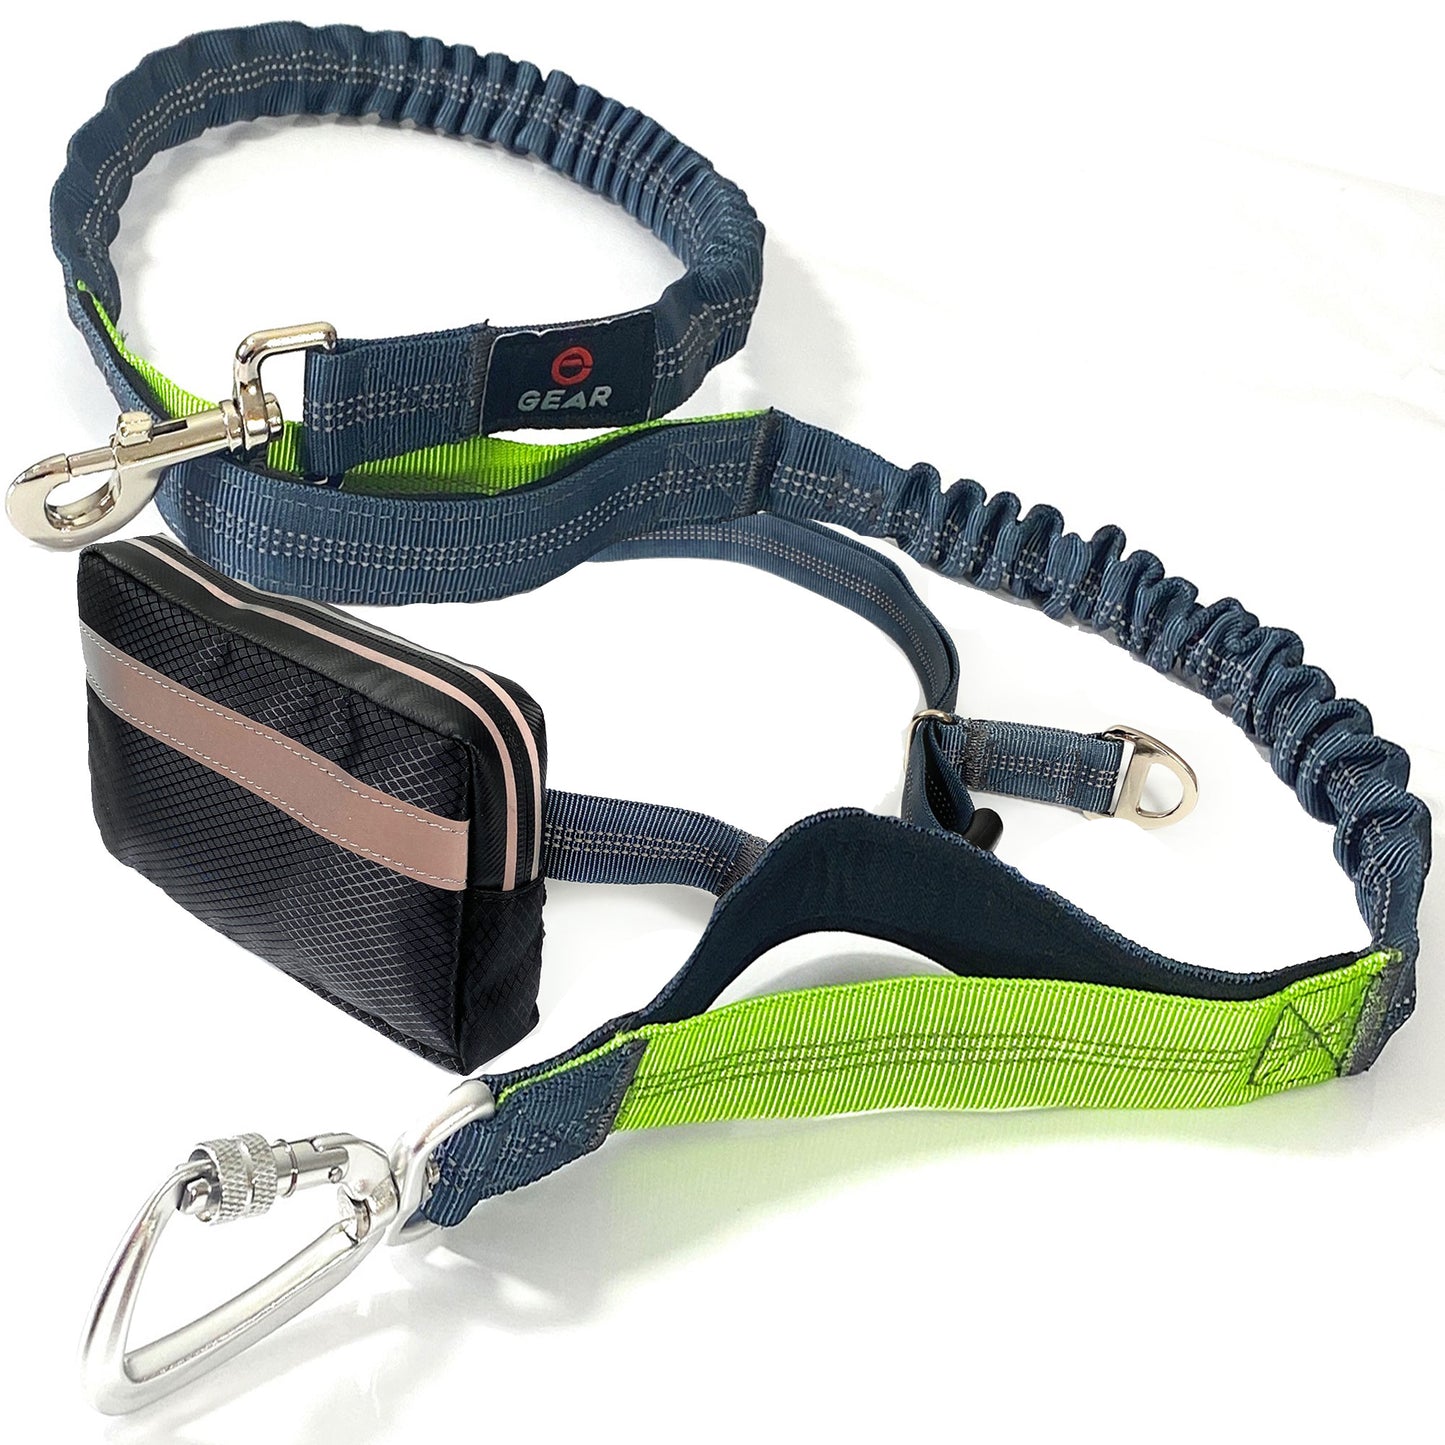 Enthusiast Gear Hands Free Dog Leash with Locking Carabiner | Weatherproof, Zipper Pouch, Dual Padded Handles and Durable Bungee for Walking, Jogging, Hiking and Running